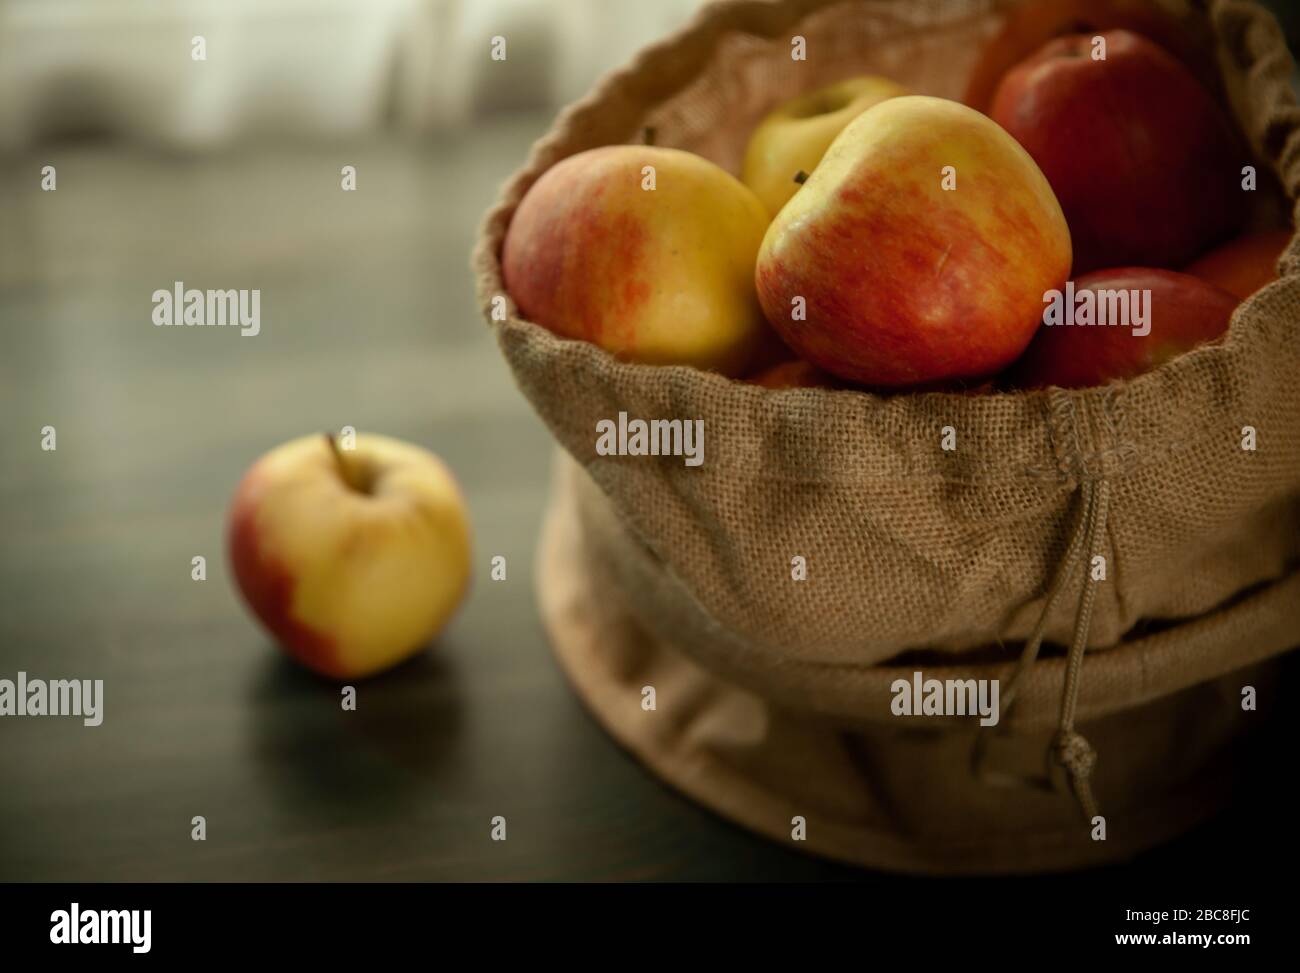 apples in saclcloth fresh helthy season fruits vintage Stock Photo